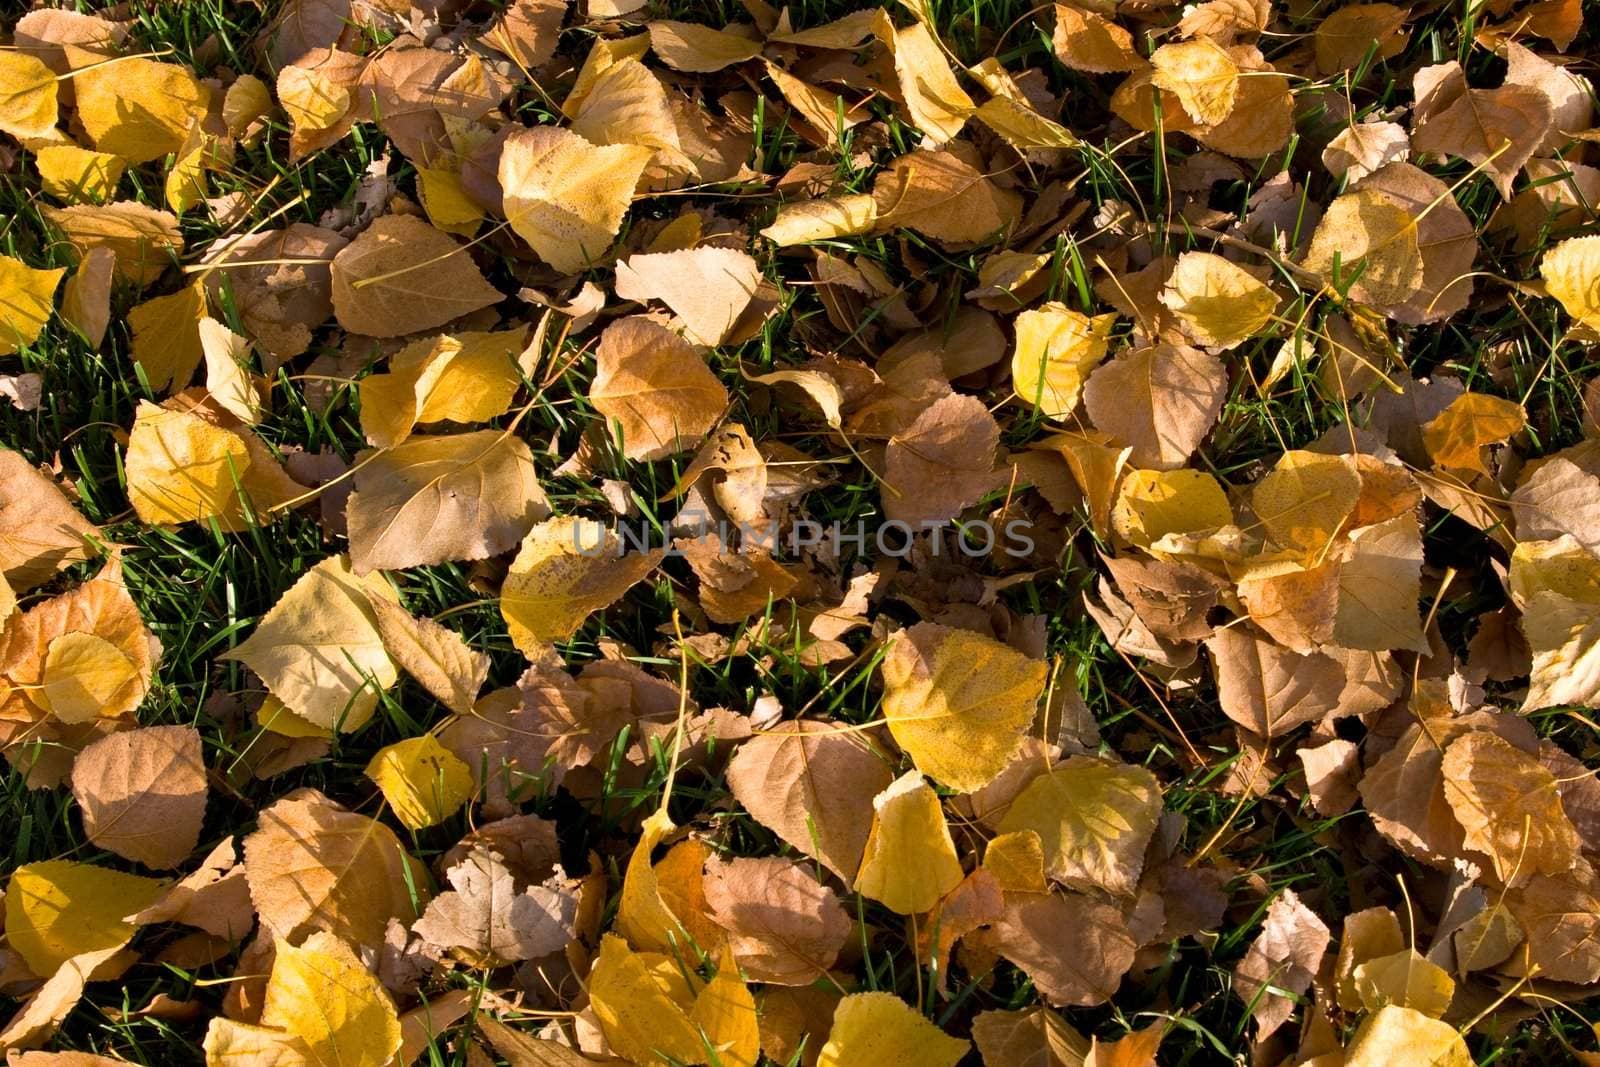 Autumn leaves by timscottrom